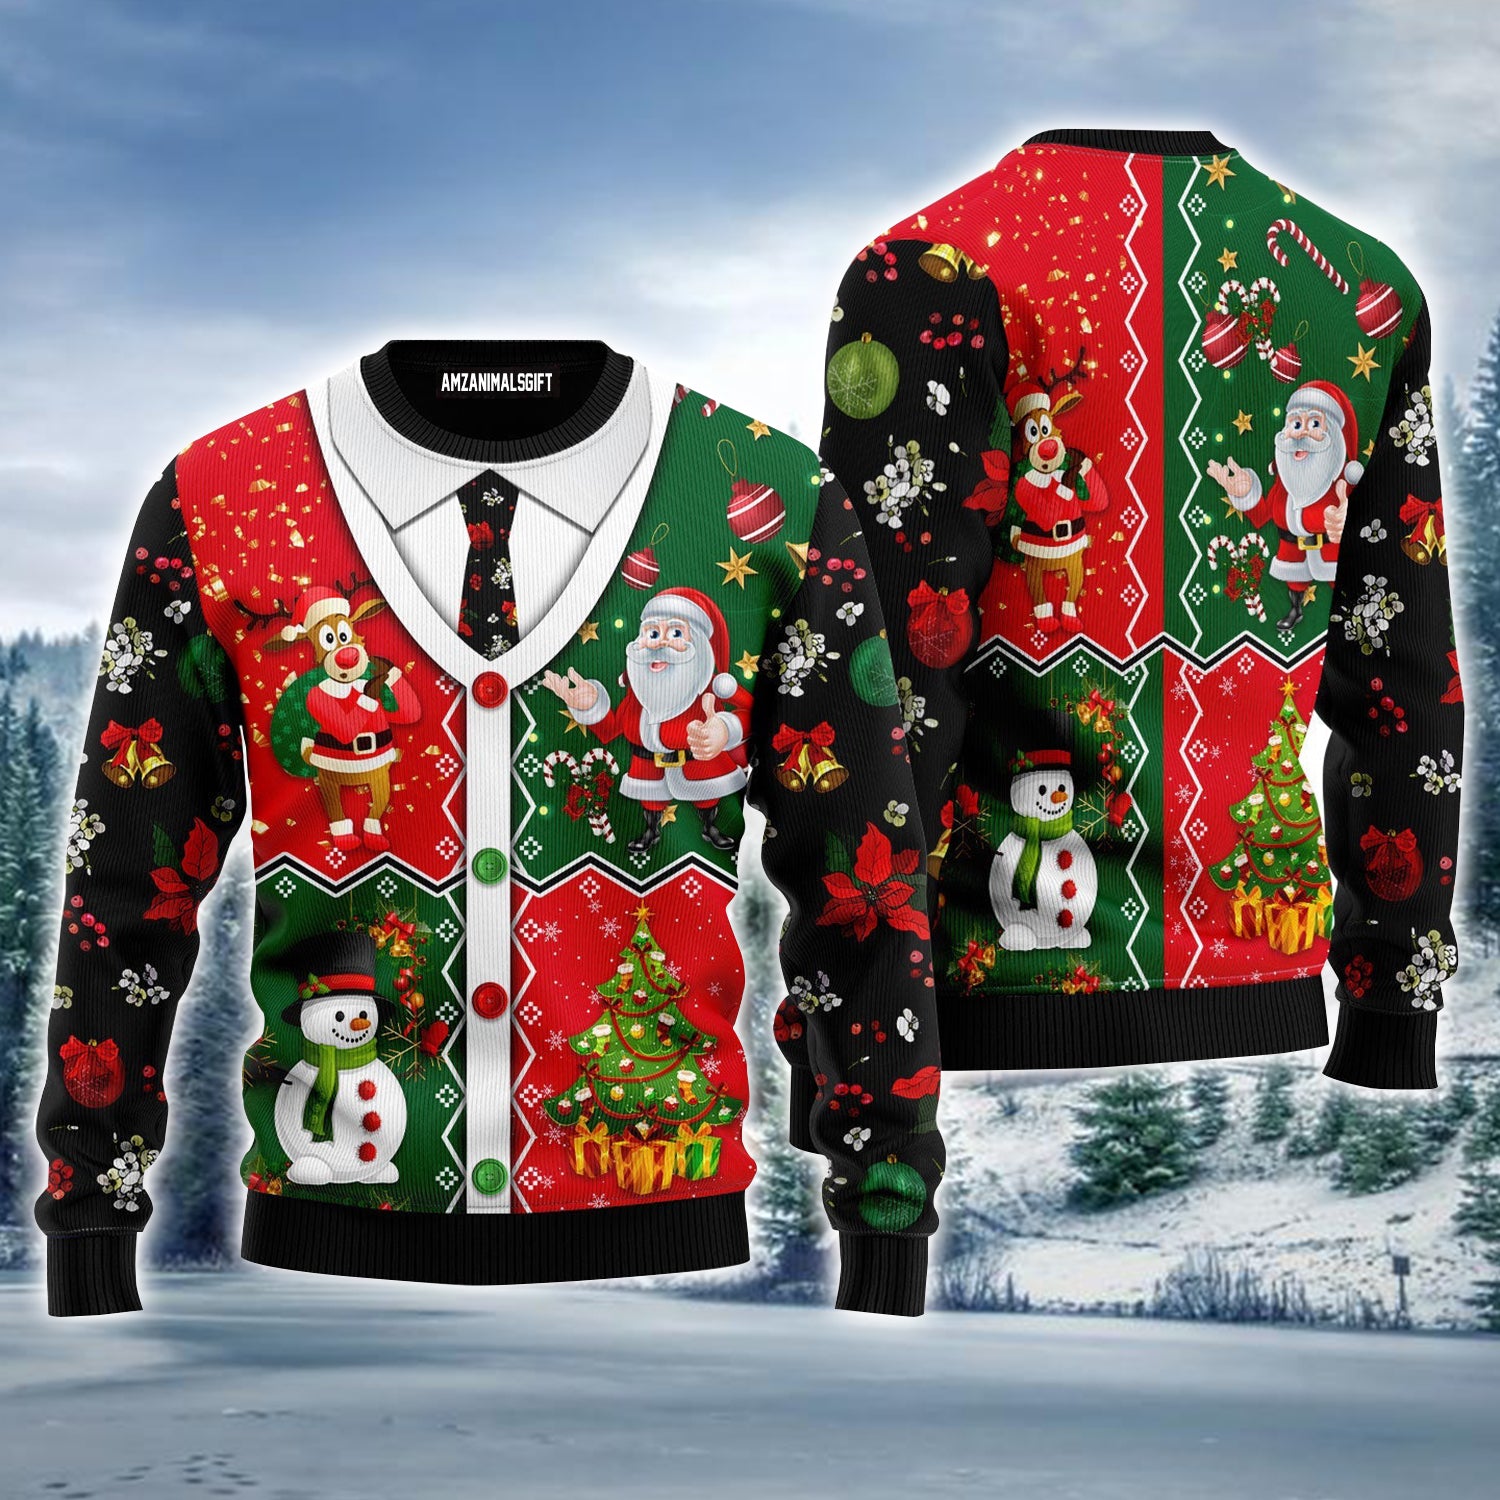 Christmas Cardigan Ugly Christmas Sweater, Santa Claus, Christmas Tree, Reindeer Ugly Sweater For Men & Women - Gift For Christmas, Friends, Family